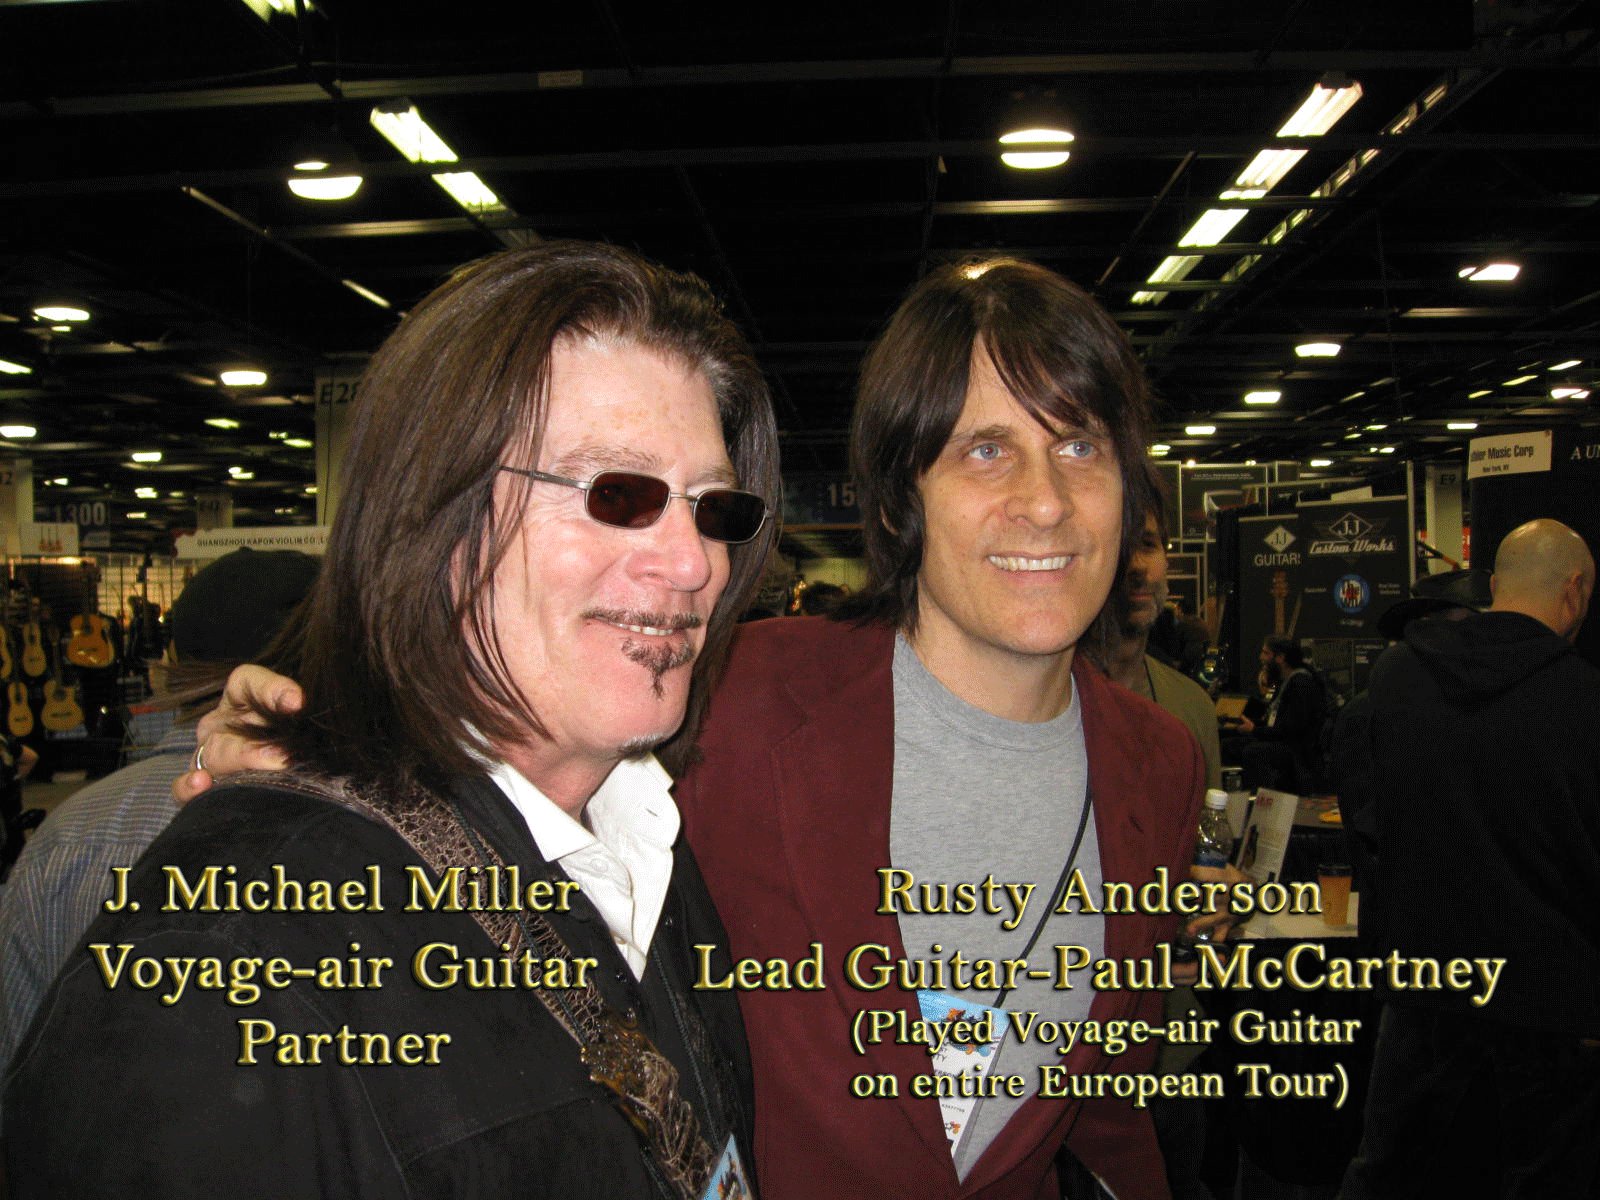 J. Michael Miller with Rusty Anderson, Lead Guitar Player with Paul McCartney (player of Voyage-air Guitar)